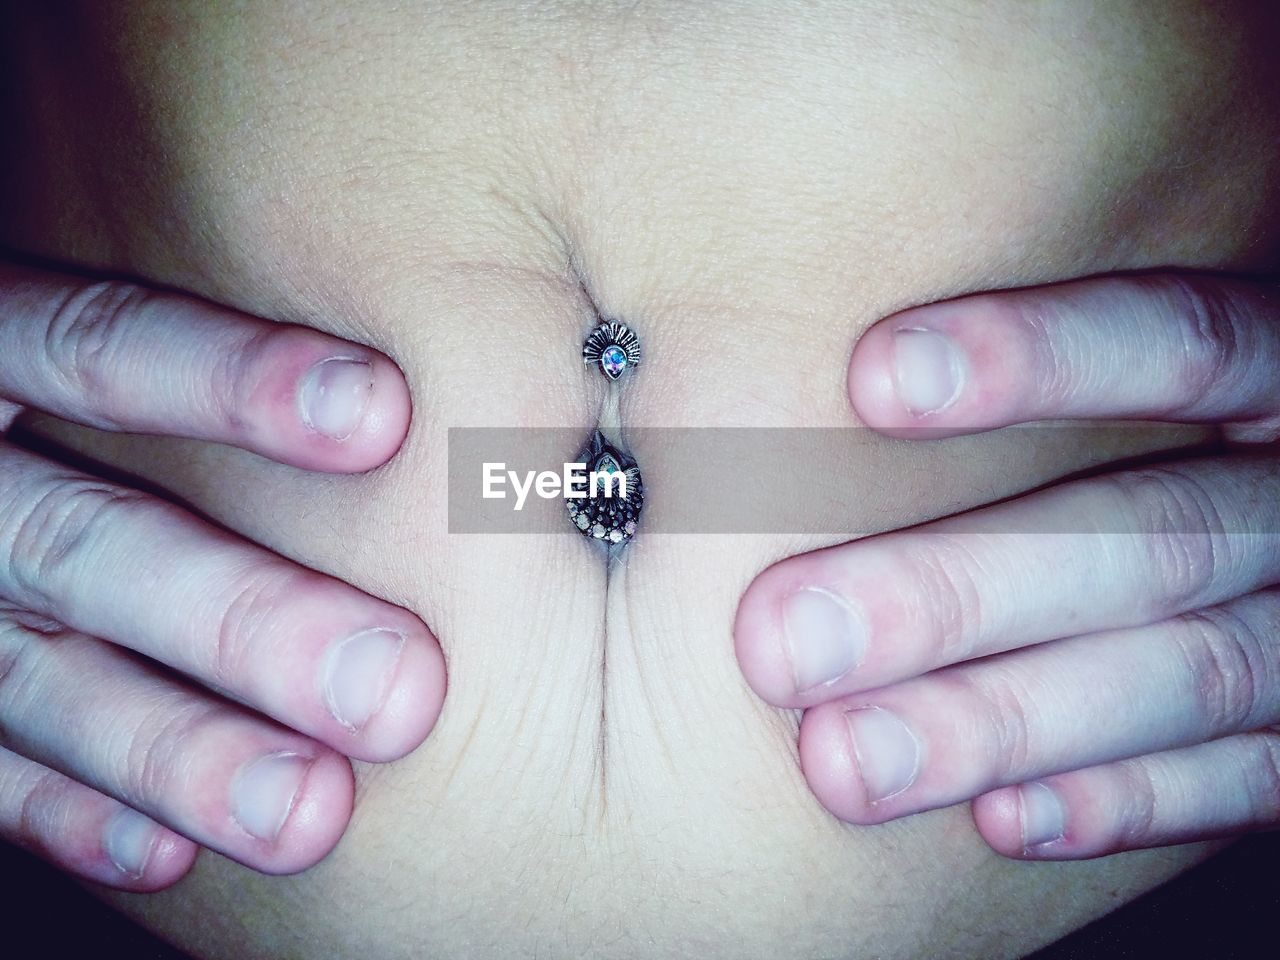 Midsection of teenage girl with belly piercing